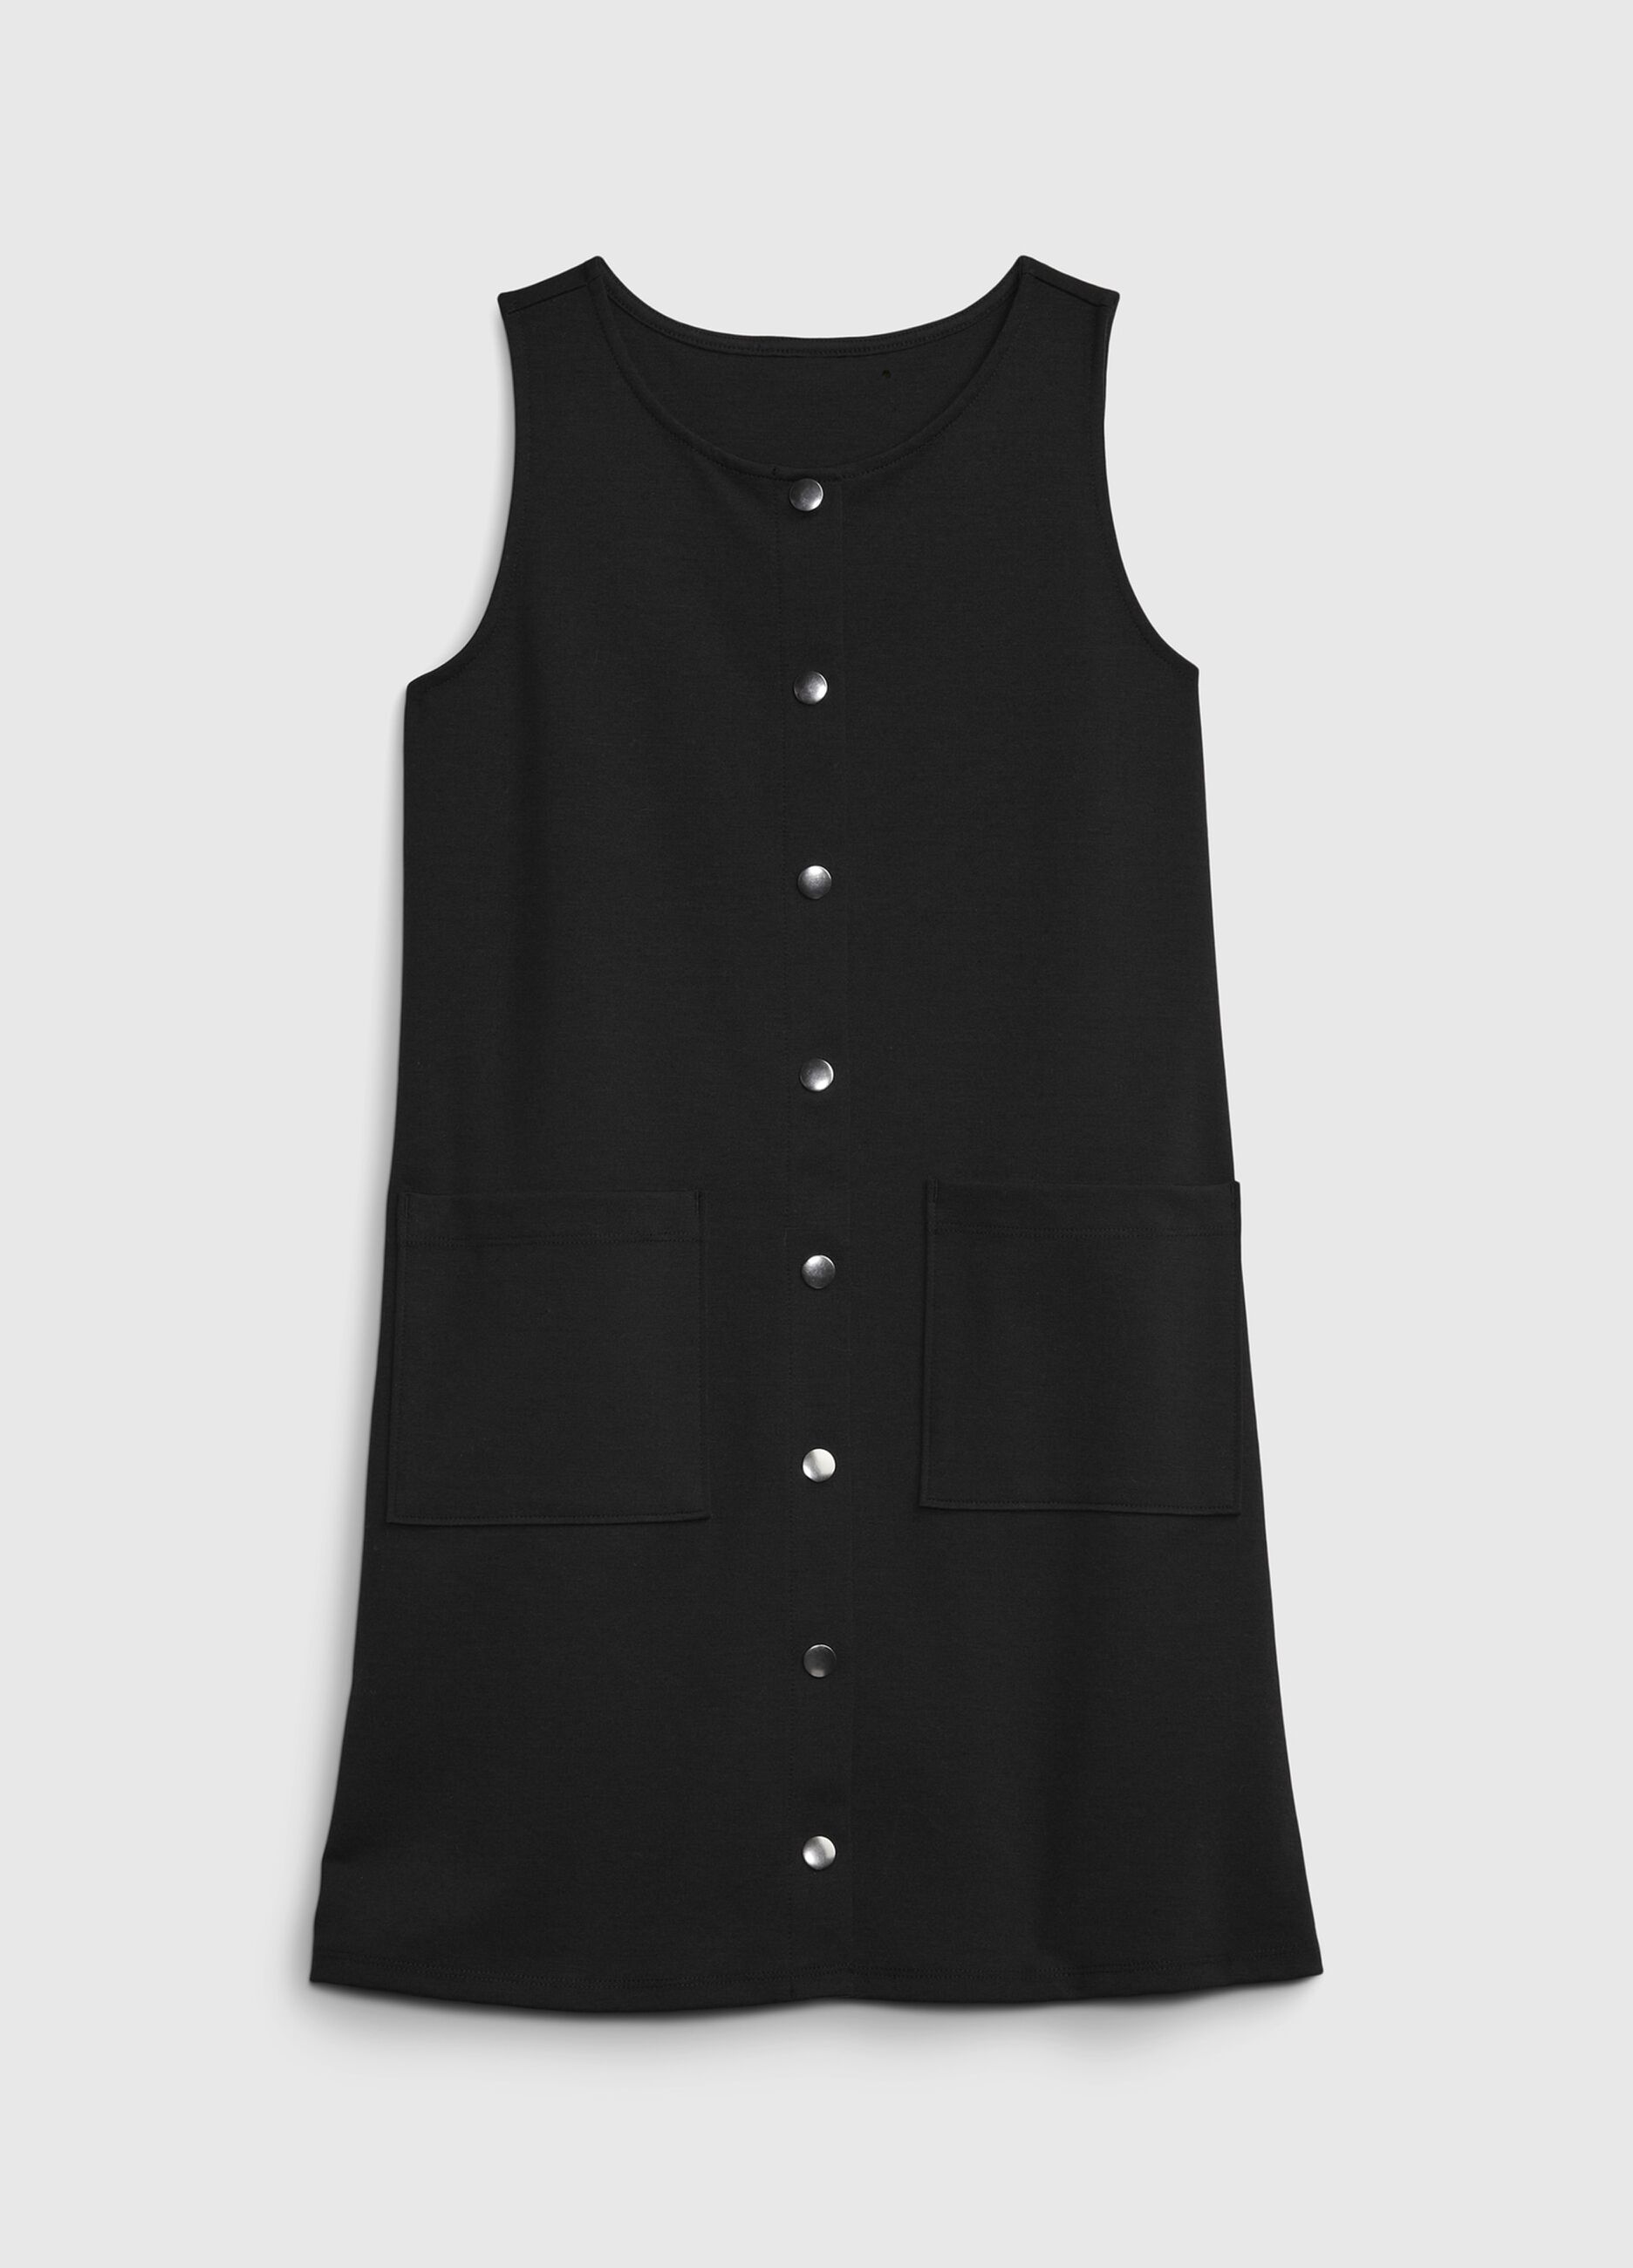 Sleeveless dress with snap fasteners